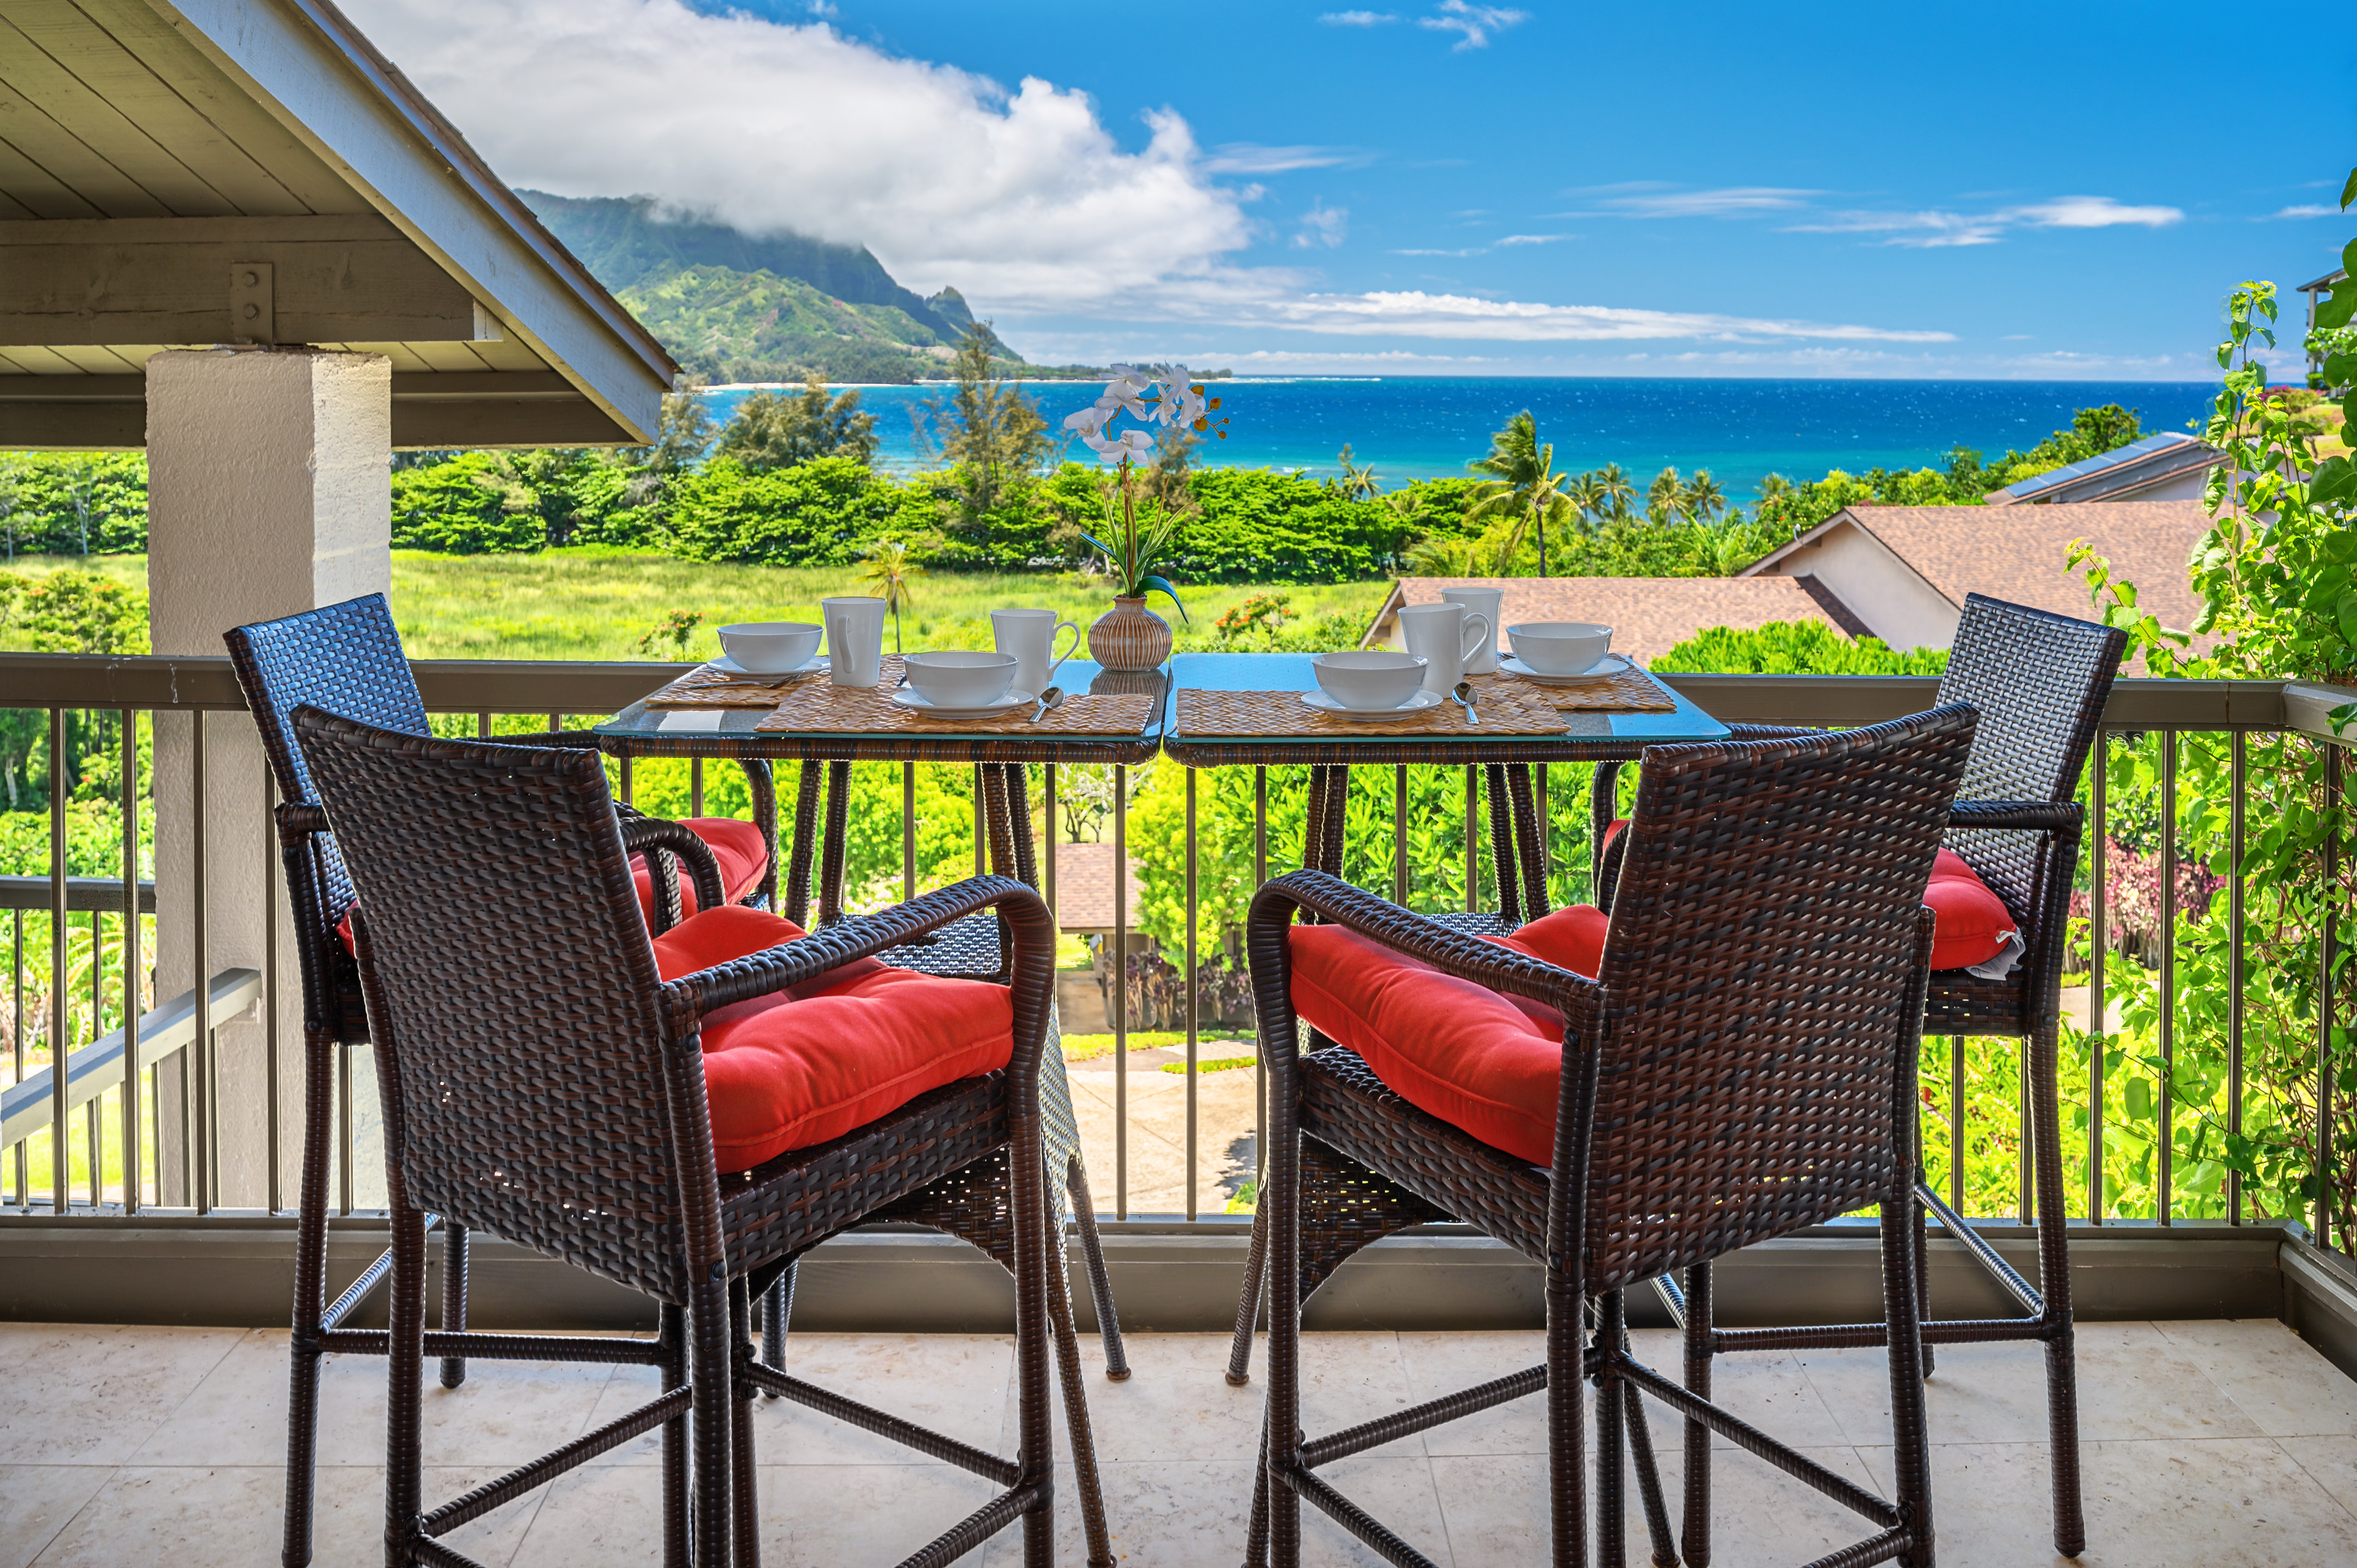 Outdoor dining with ocean and Bali Hai views is unbeatable!